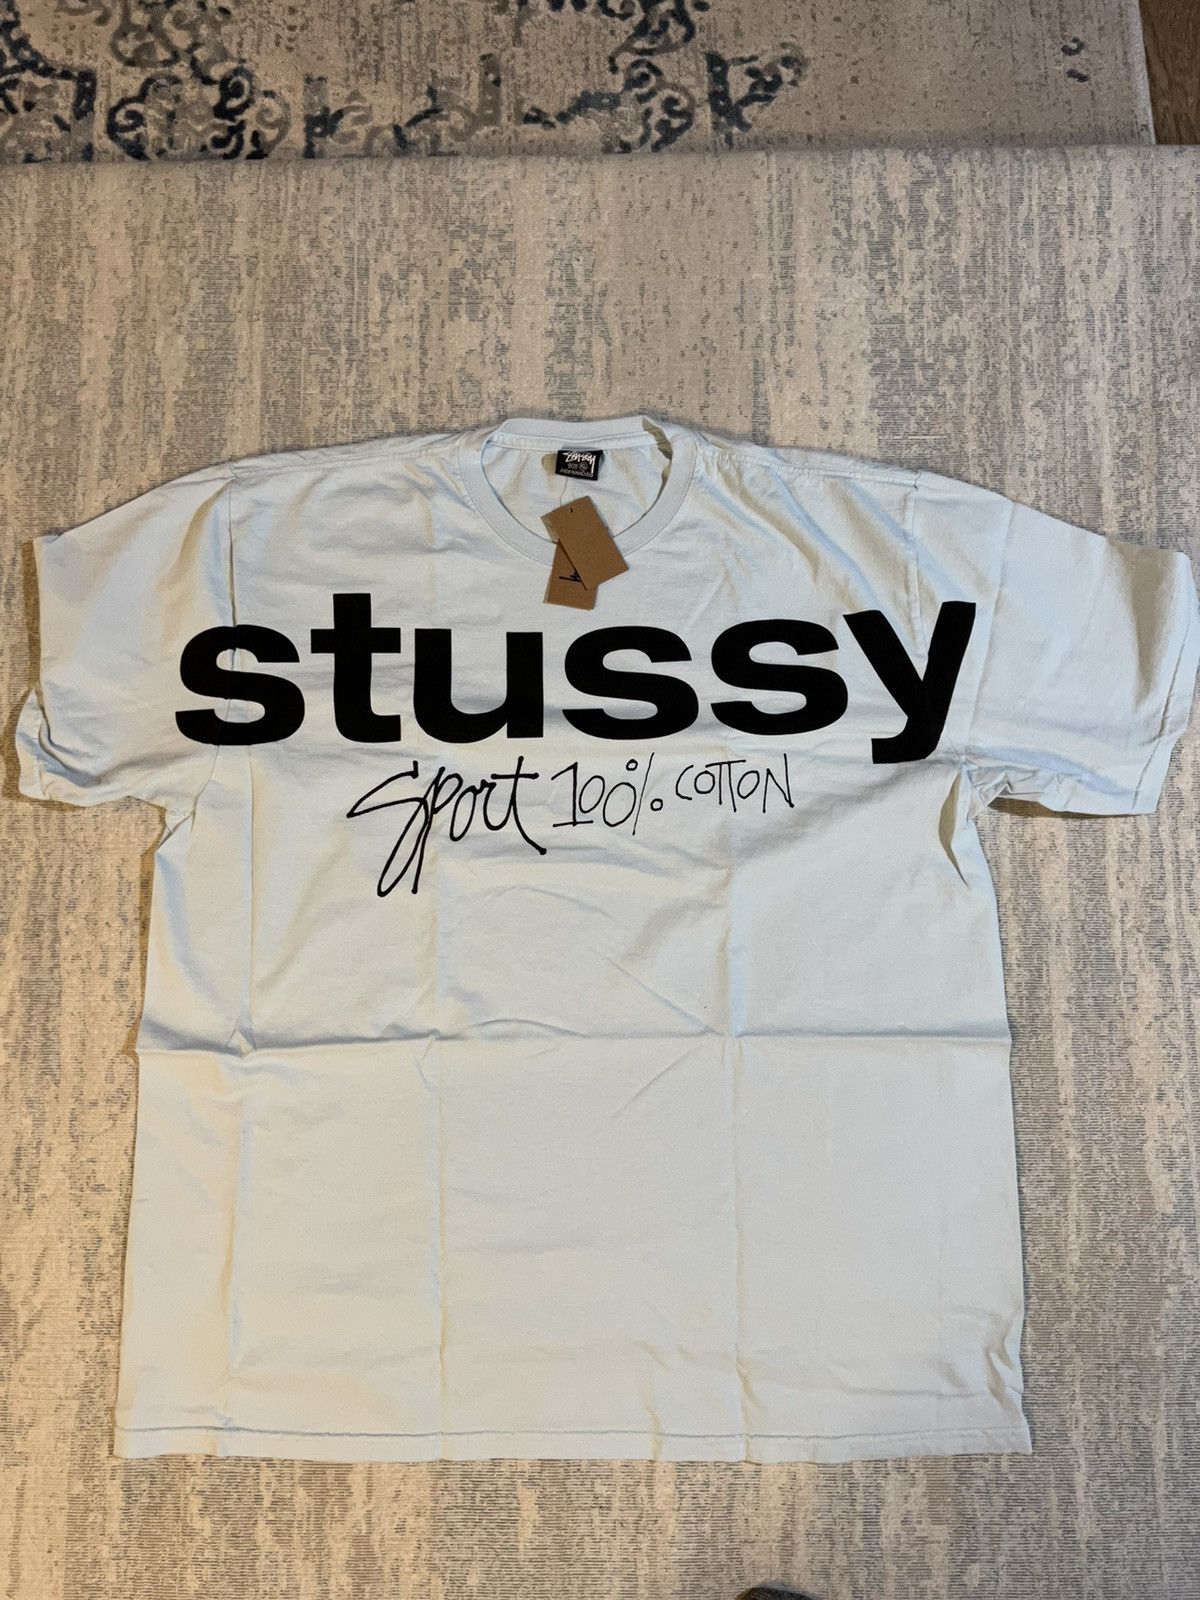 Stussy Stussy 100% Block Sport Pigment Dyed Tee | Grailed